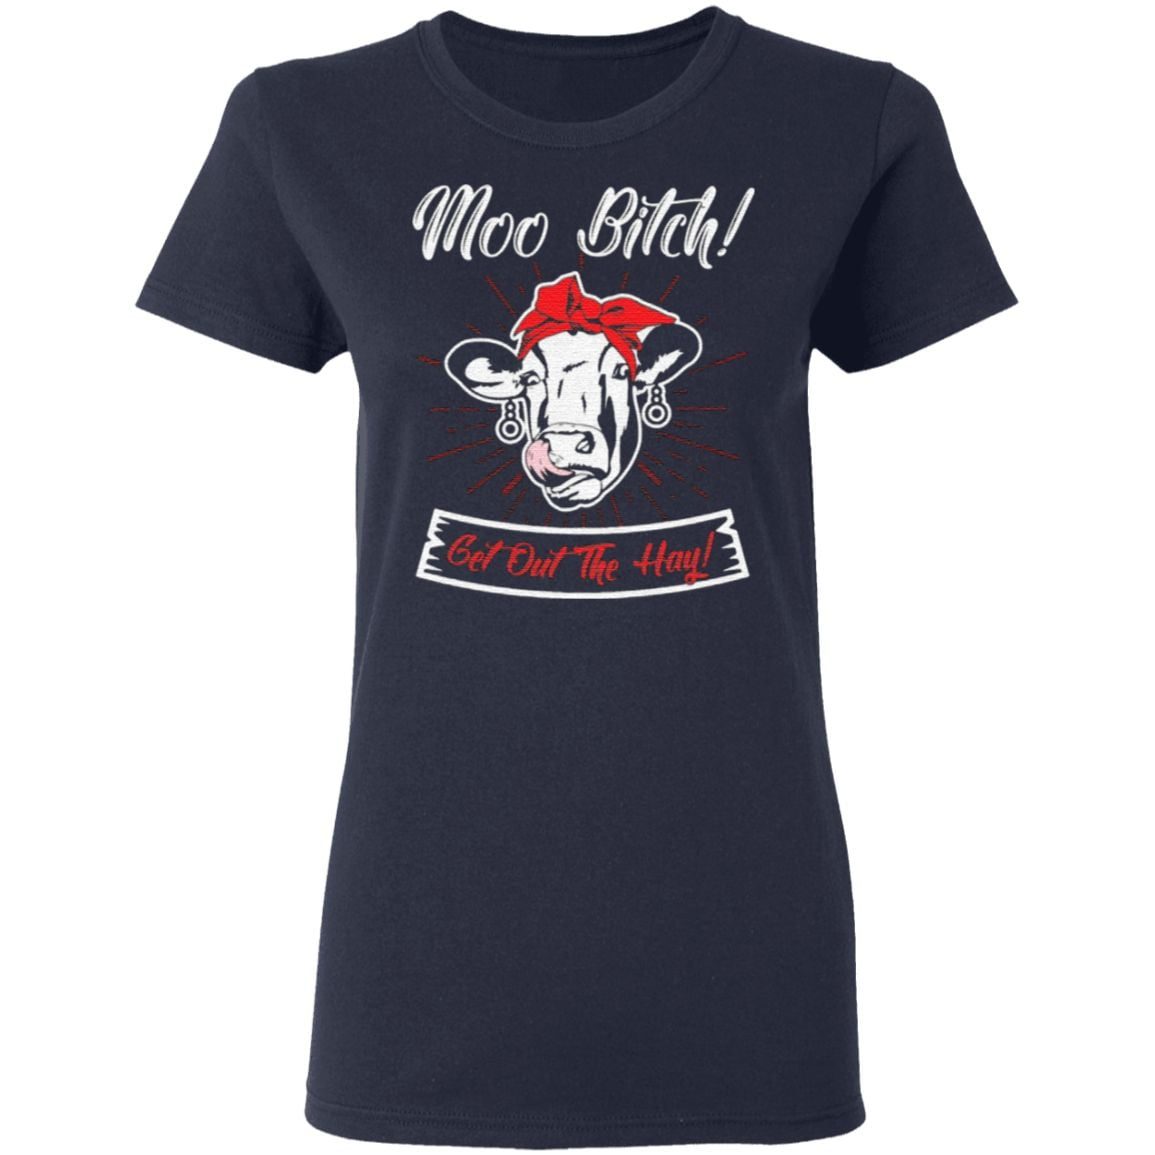 Moo Bitch Get Out of My Hay Heifer T-Shirt